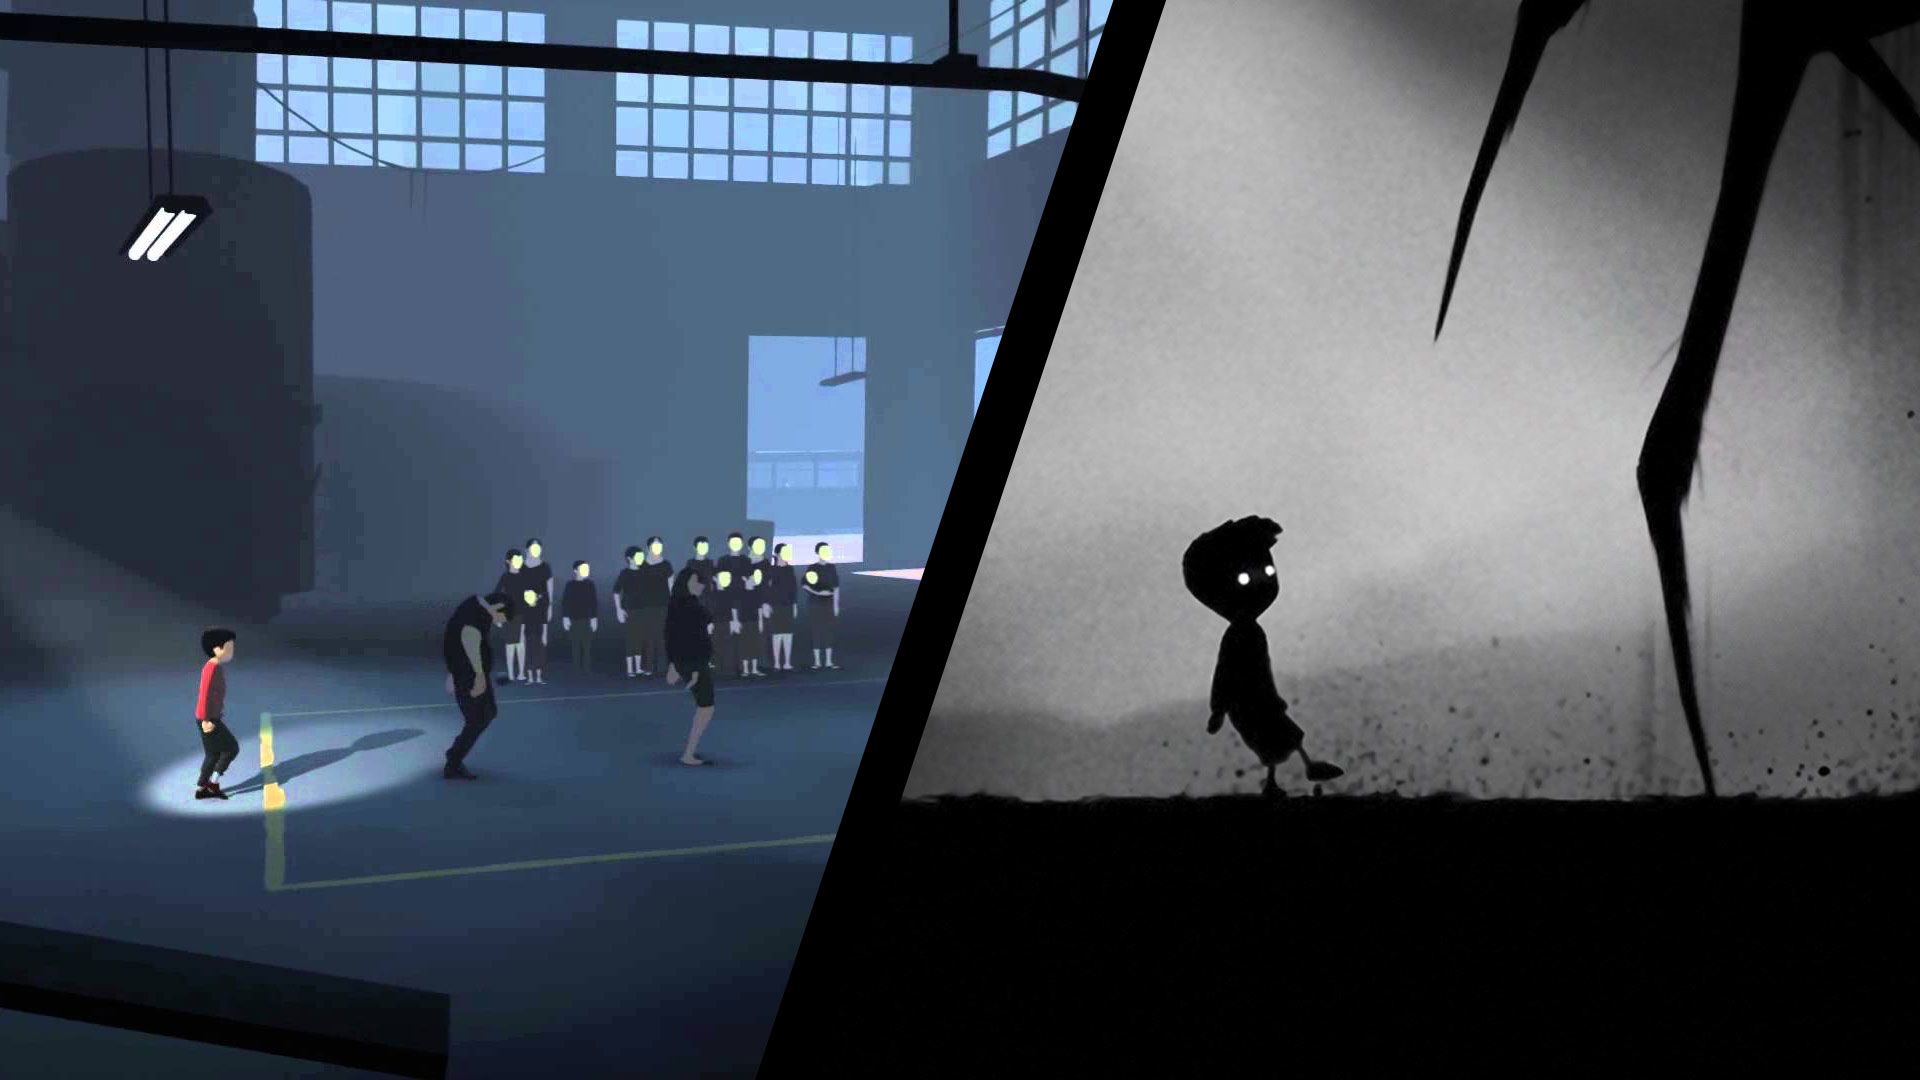 limbo and inside download